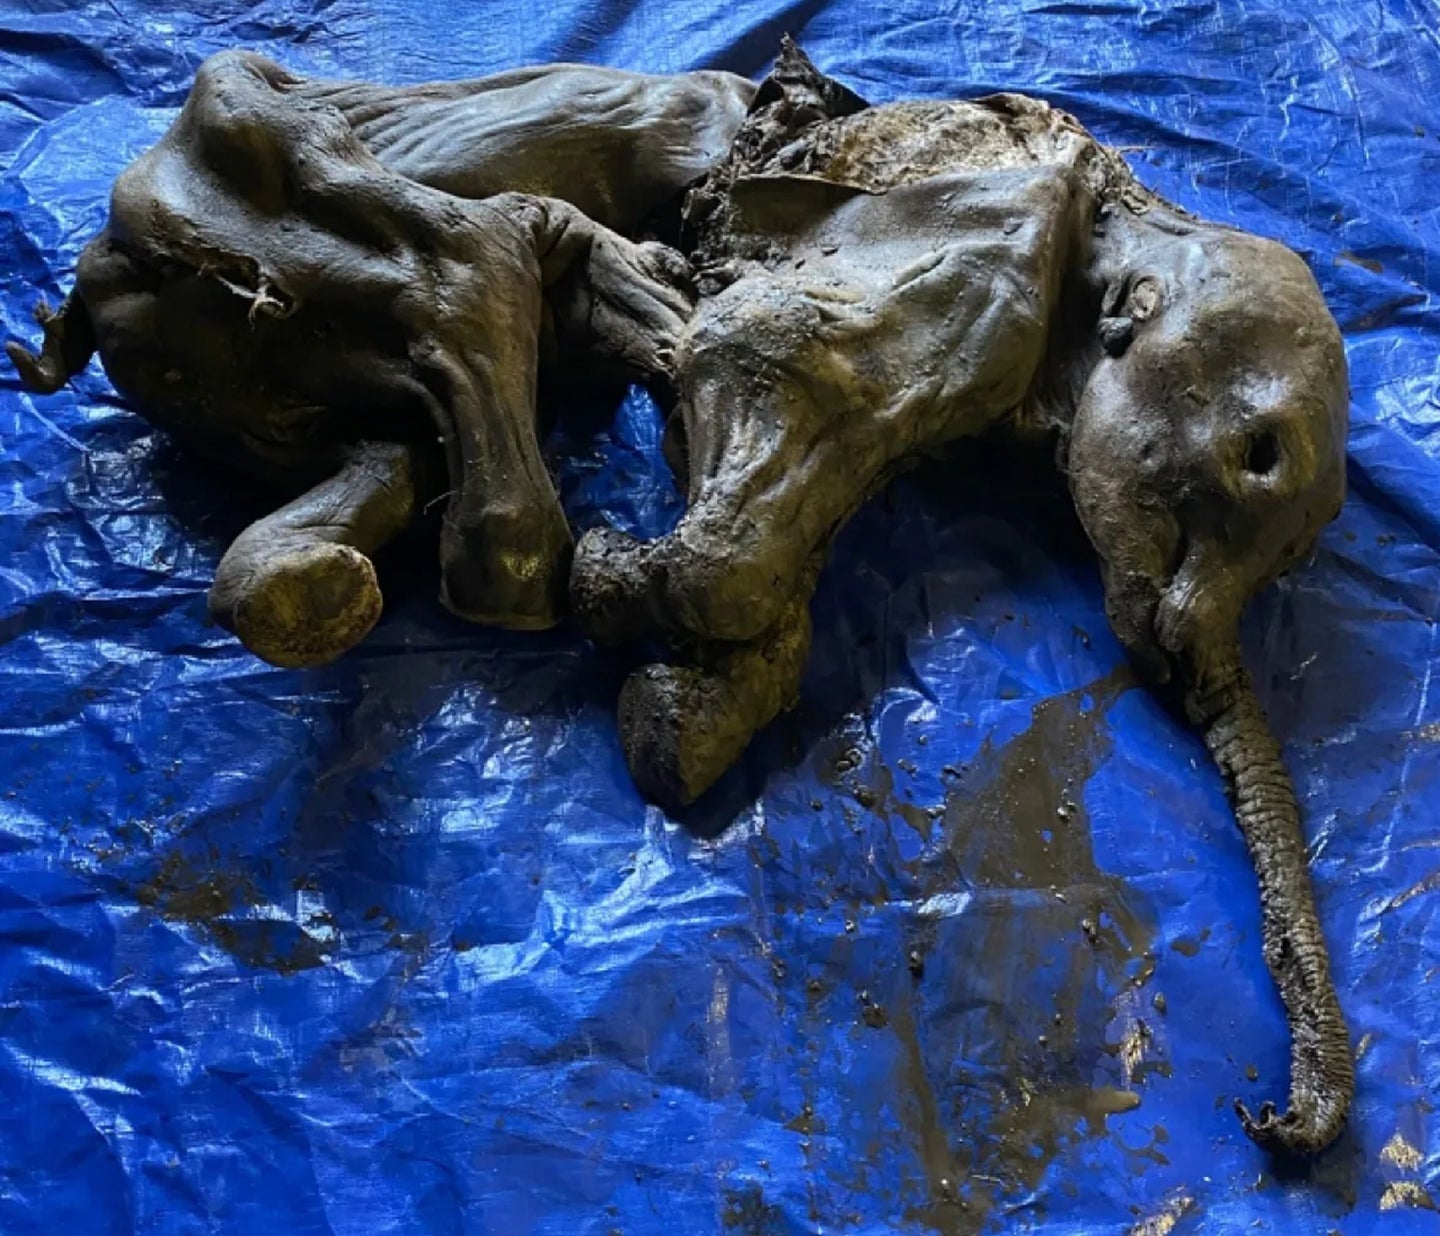 Baby woolly mammoth from North American permafrost with trunk intact stretched out on blue tarp